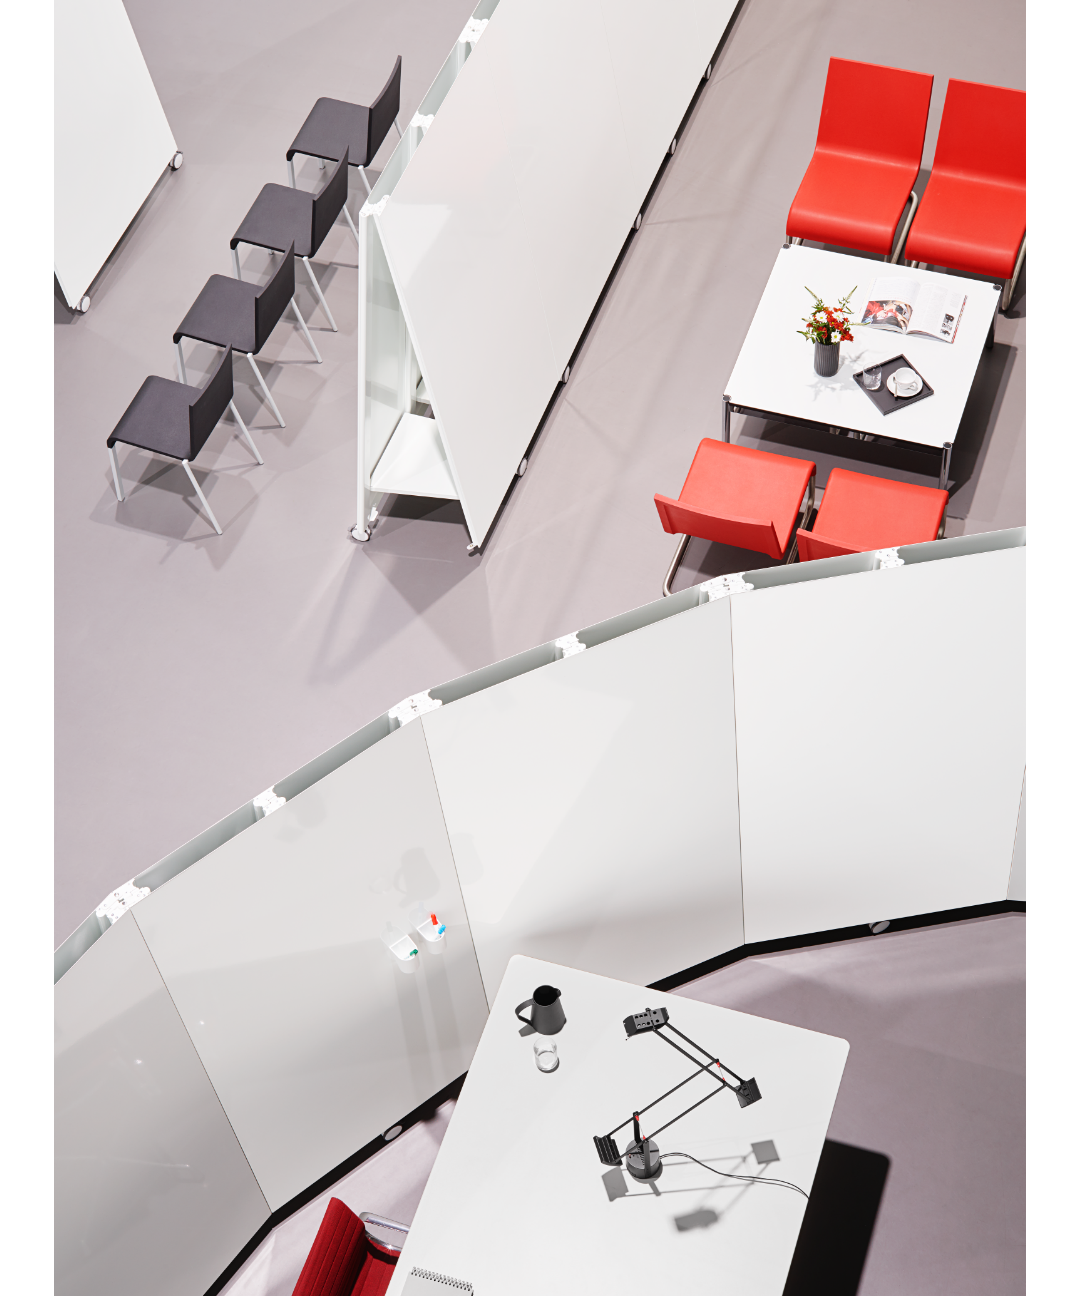 12-moving-wall-modulares-mobiles-magnetisches-whiteboard-fuer-newwork-workshops-kreativzonen